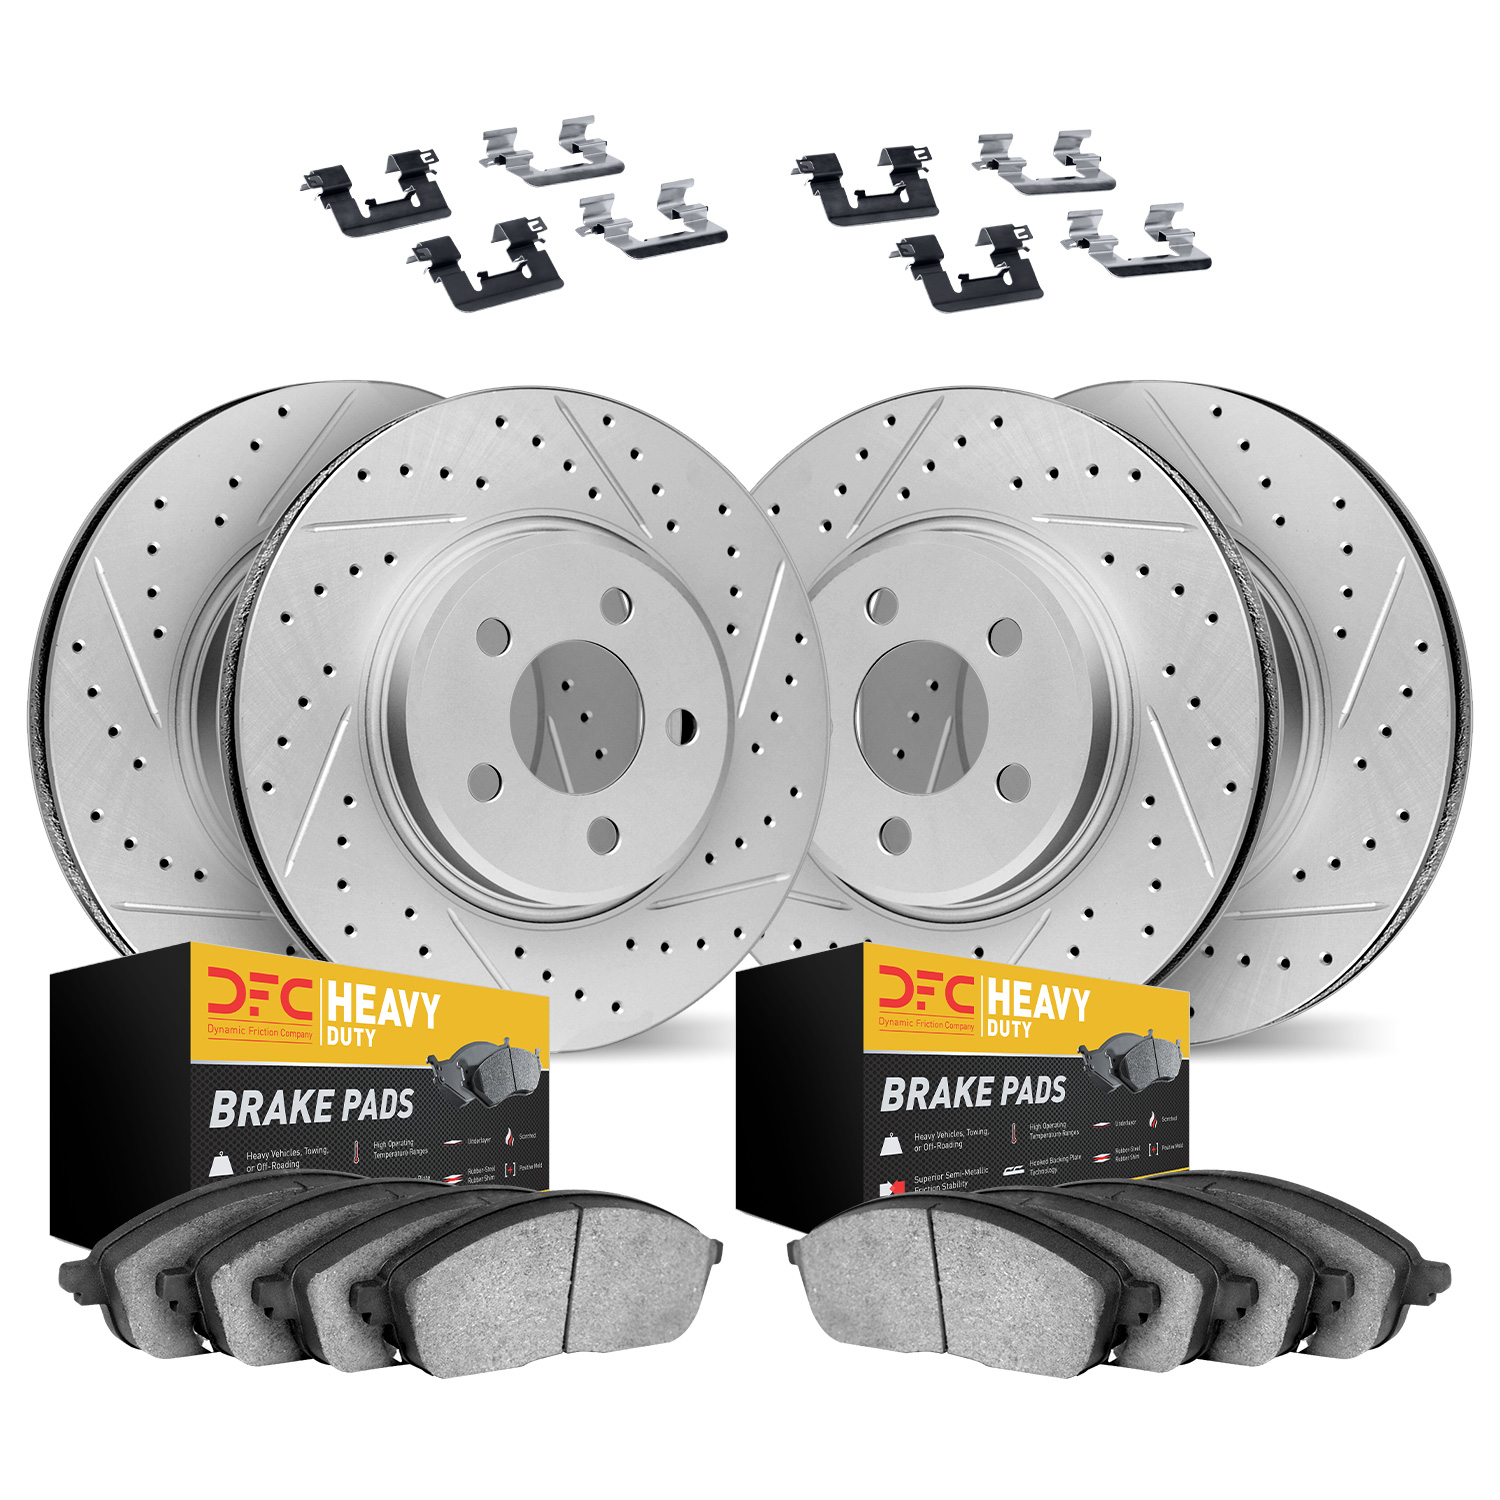 2214-55001 Geoperformance Drilled/Slotted Rotors w/Heavy-Duty Pads Kit & Hardware, 2003-2011 Ford/Lincoln/Mercury/Mazda, Positio